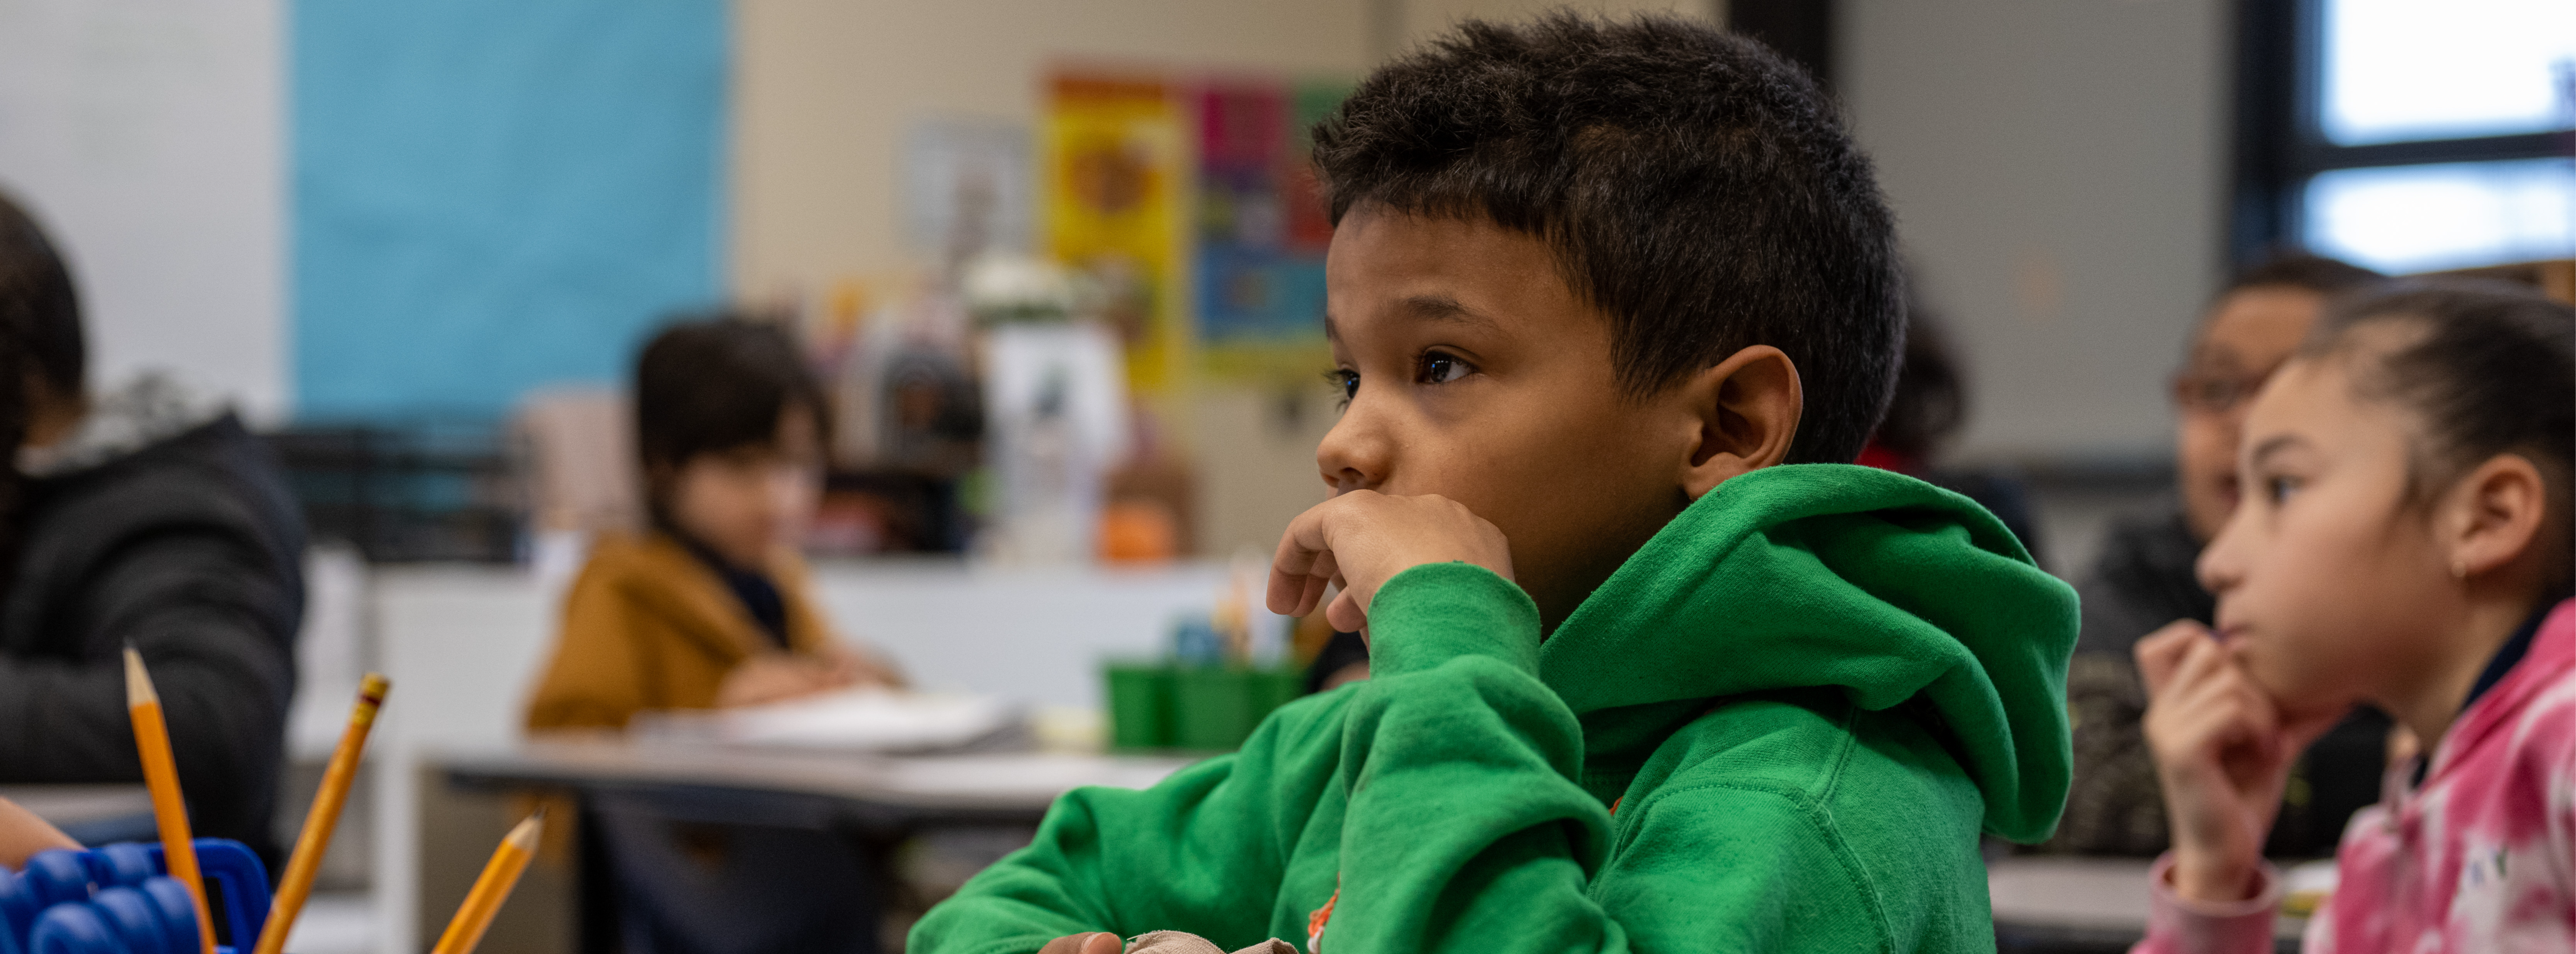 Kelly student in green sweater focused in class with classmates in the background. 